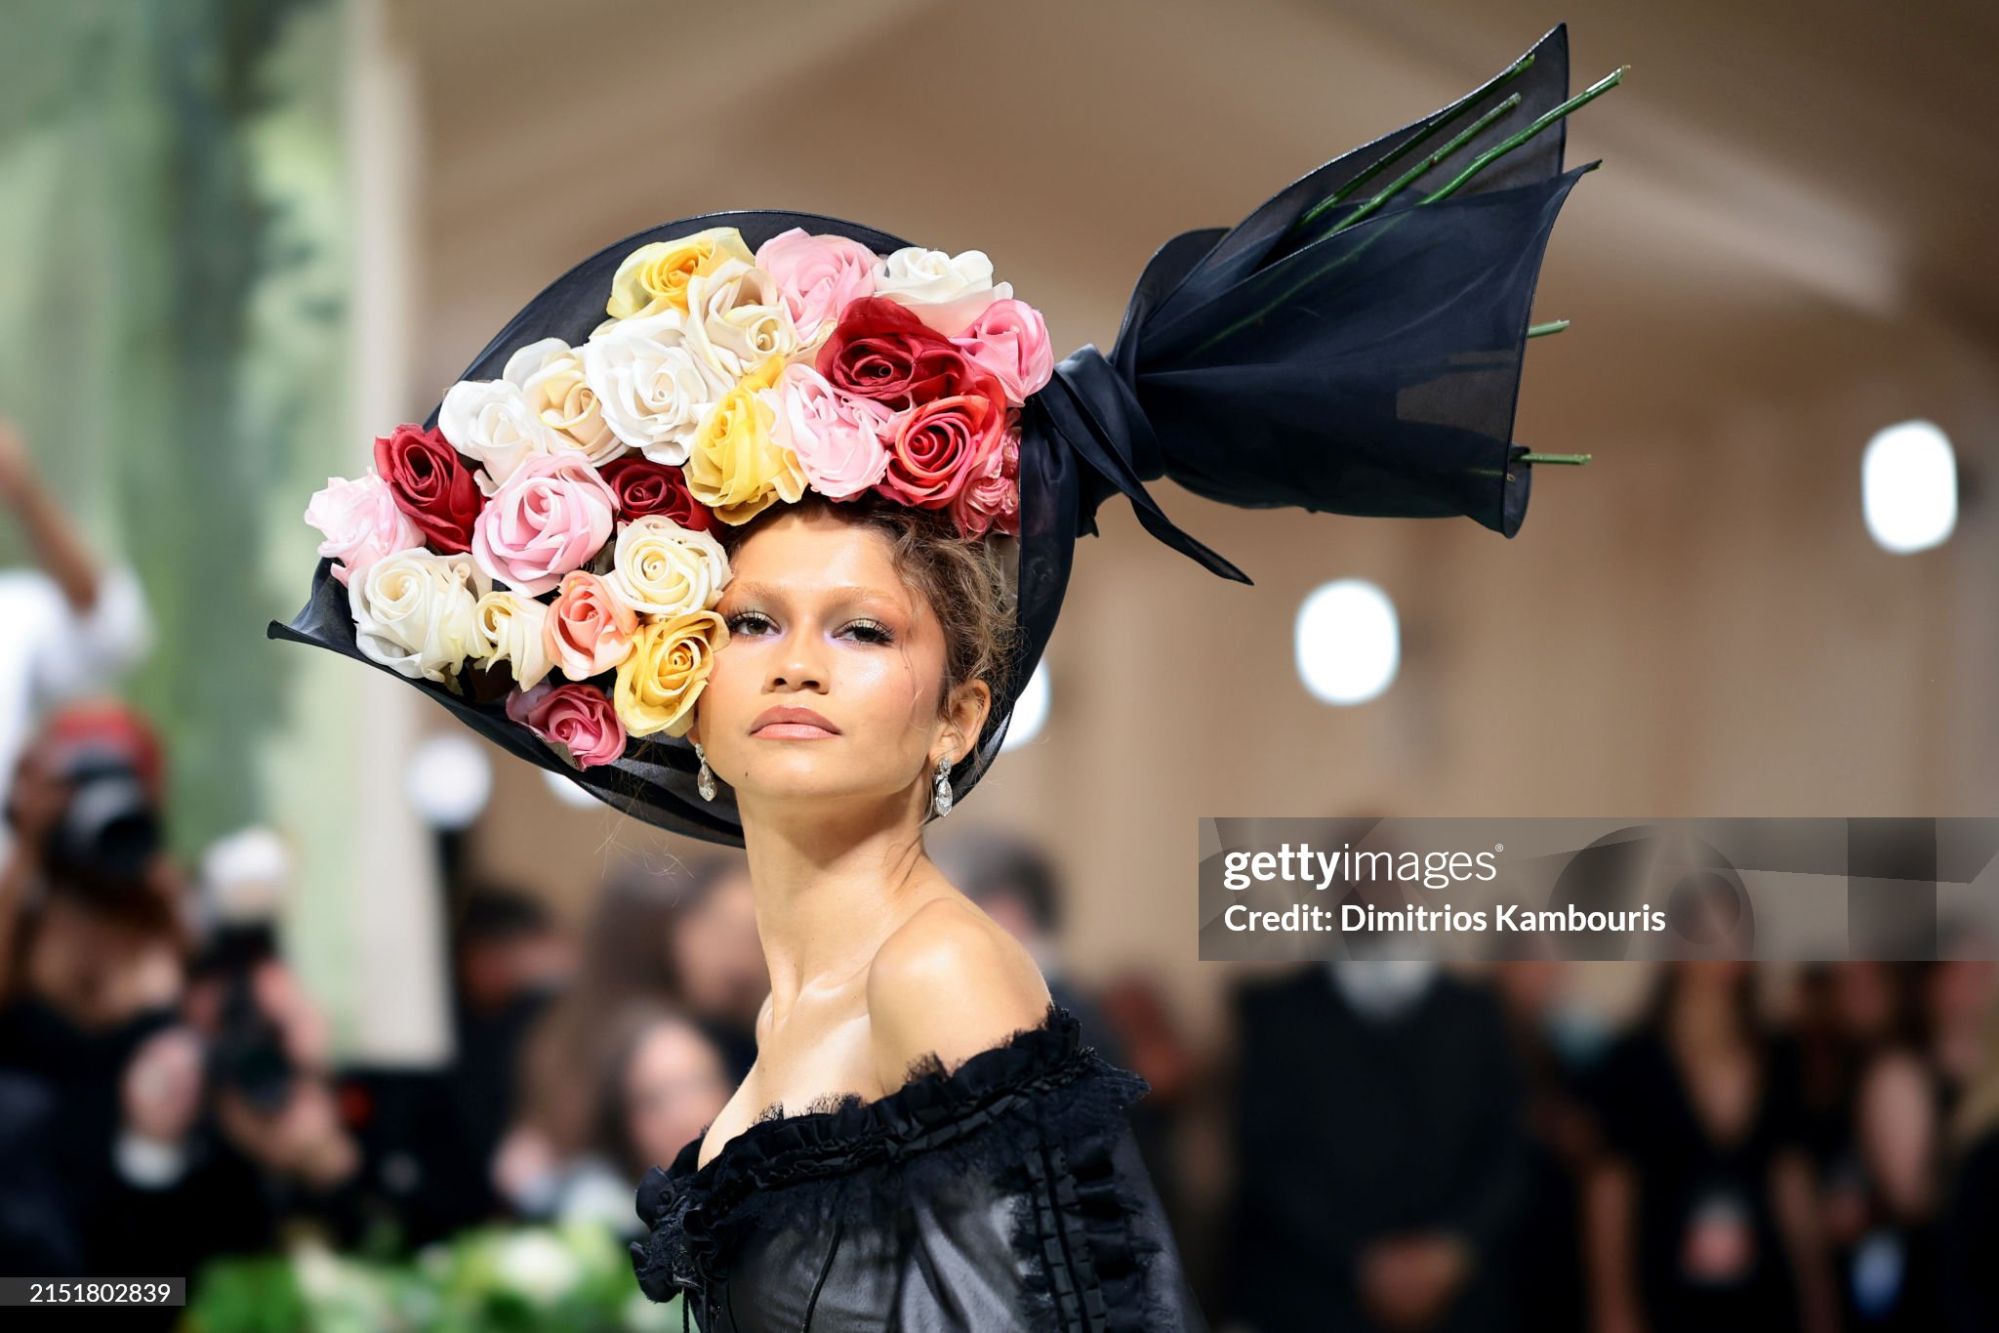 gettyimages-2151802839-2048x2048.jpg